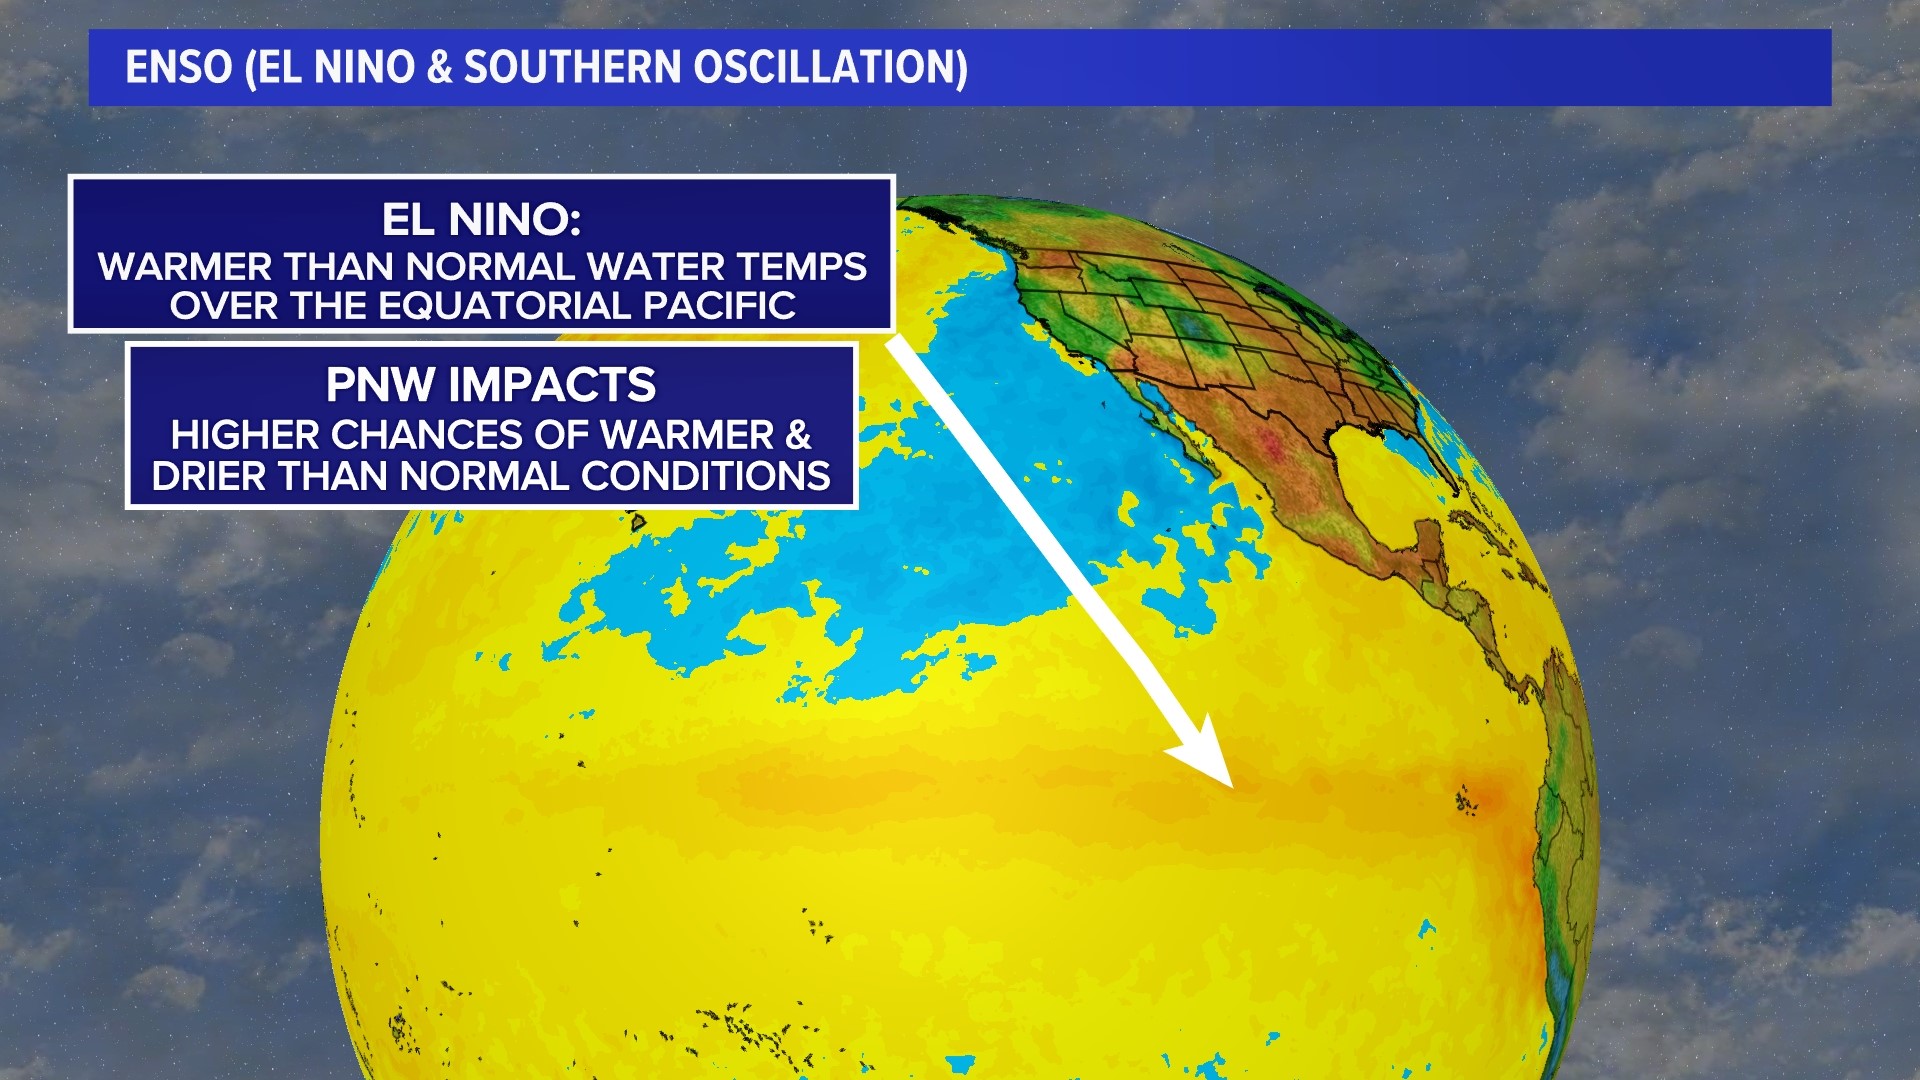 KING 5 Meteorologist Adam Claibon explains what an El Niño is and how the climate pattern will impact the Pacific Northwest.